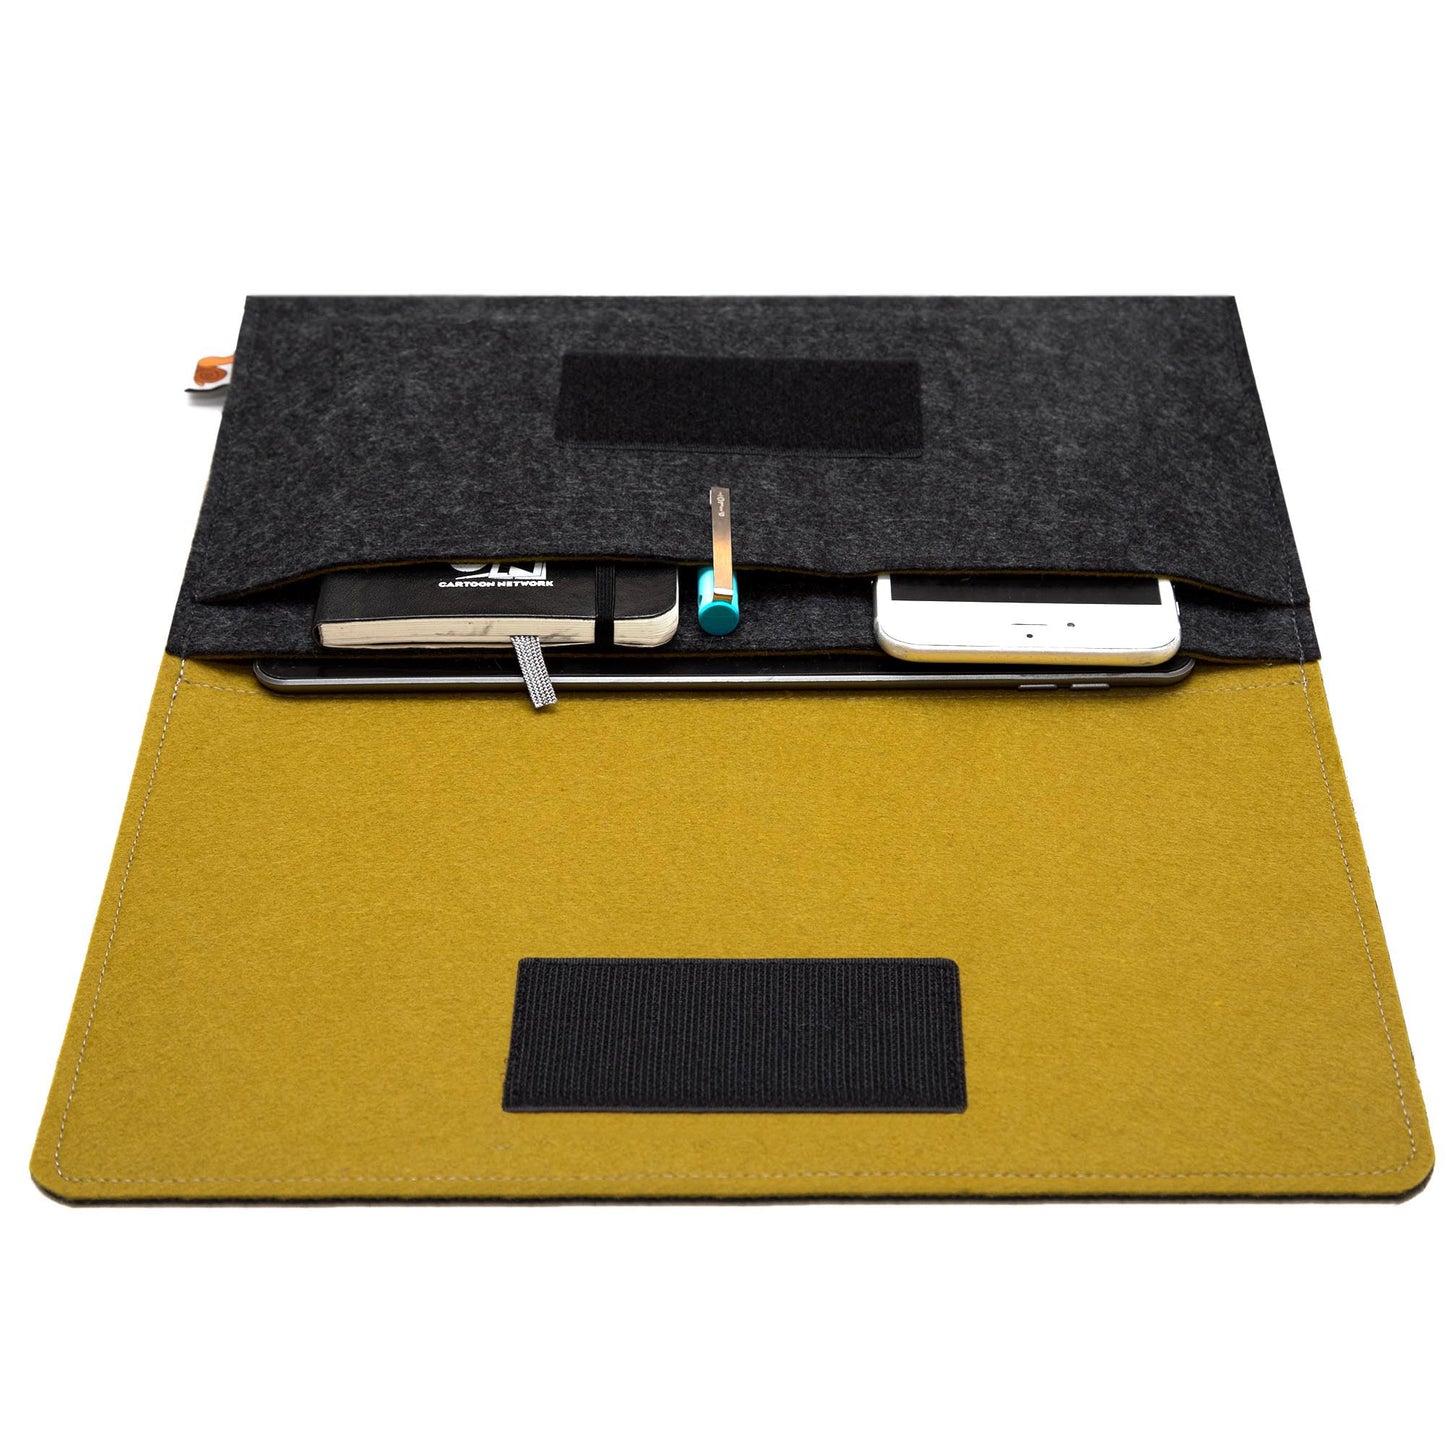 Premium Felt iPad Cover: Ultimate Protection with Accessories Pocket - Charcoal & Dark Golden Rot